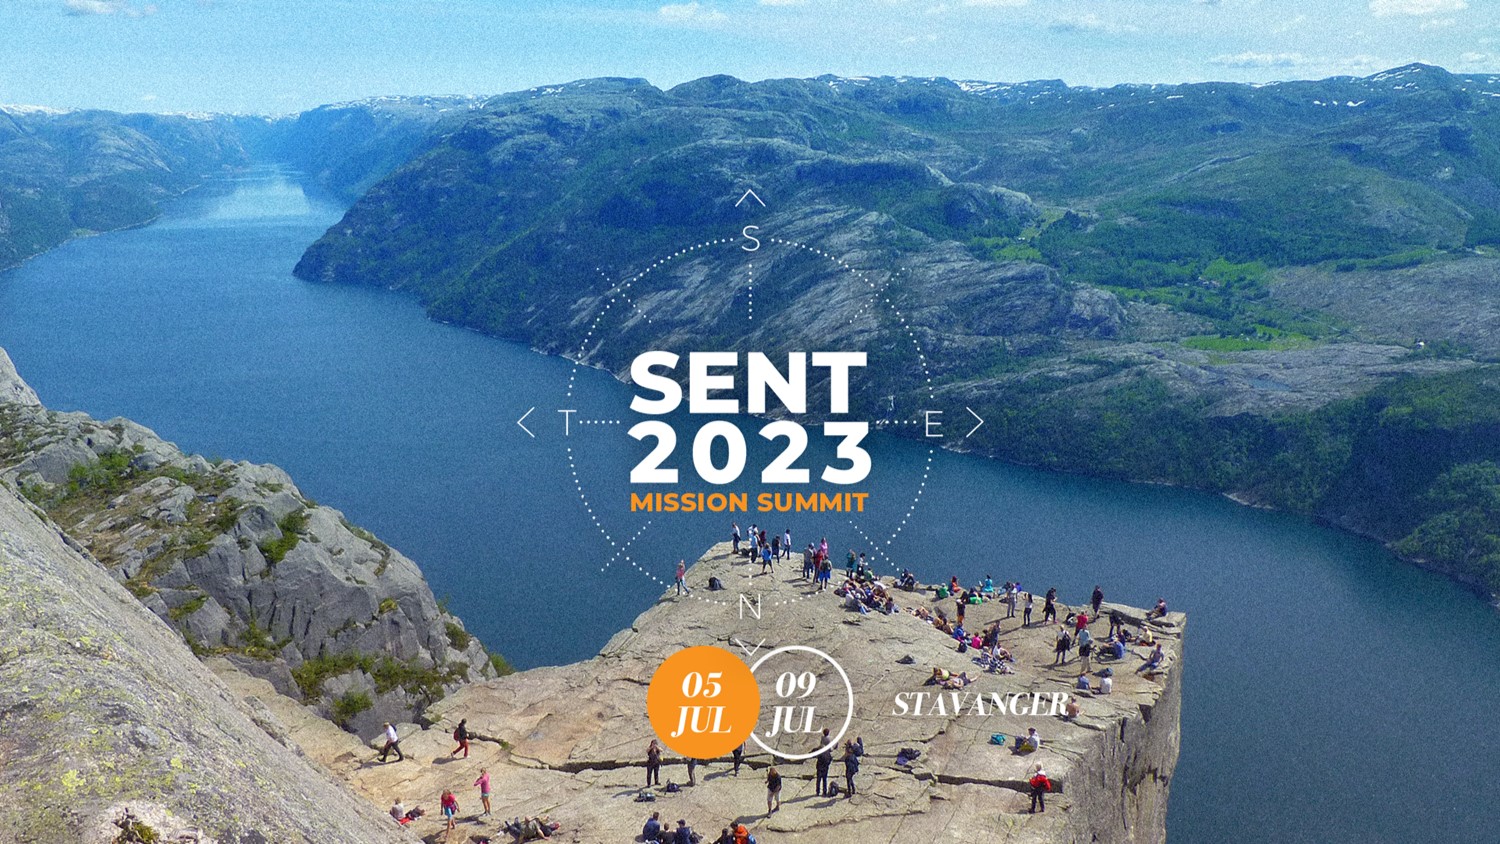 Featured image for “Sent 2023”